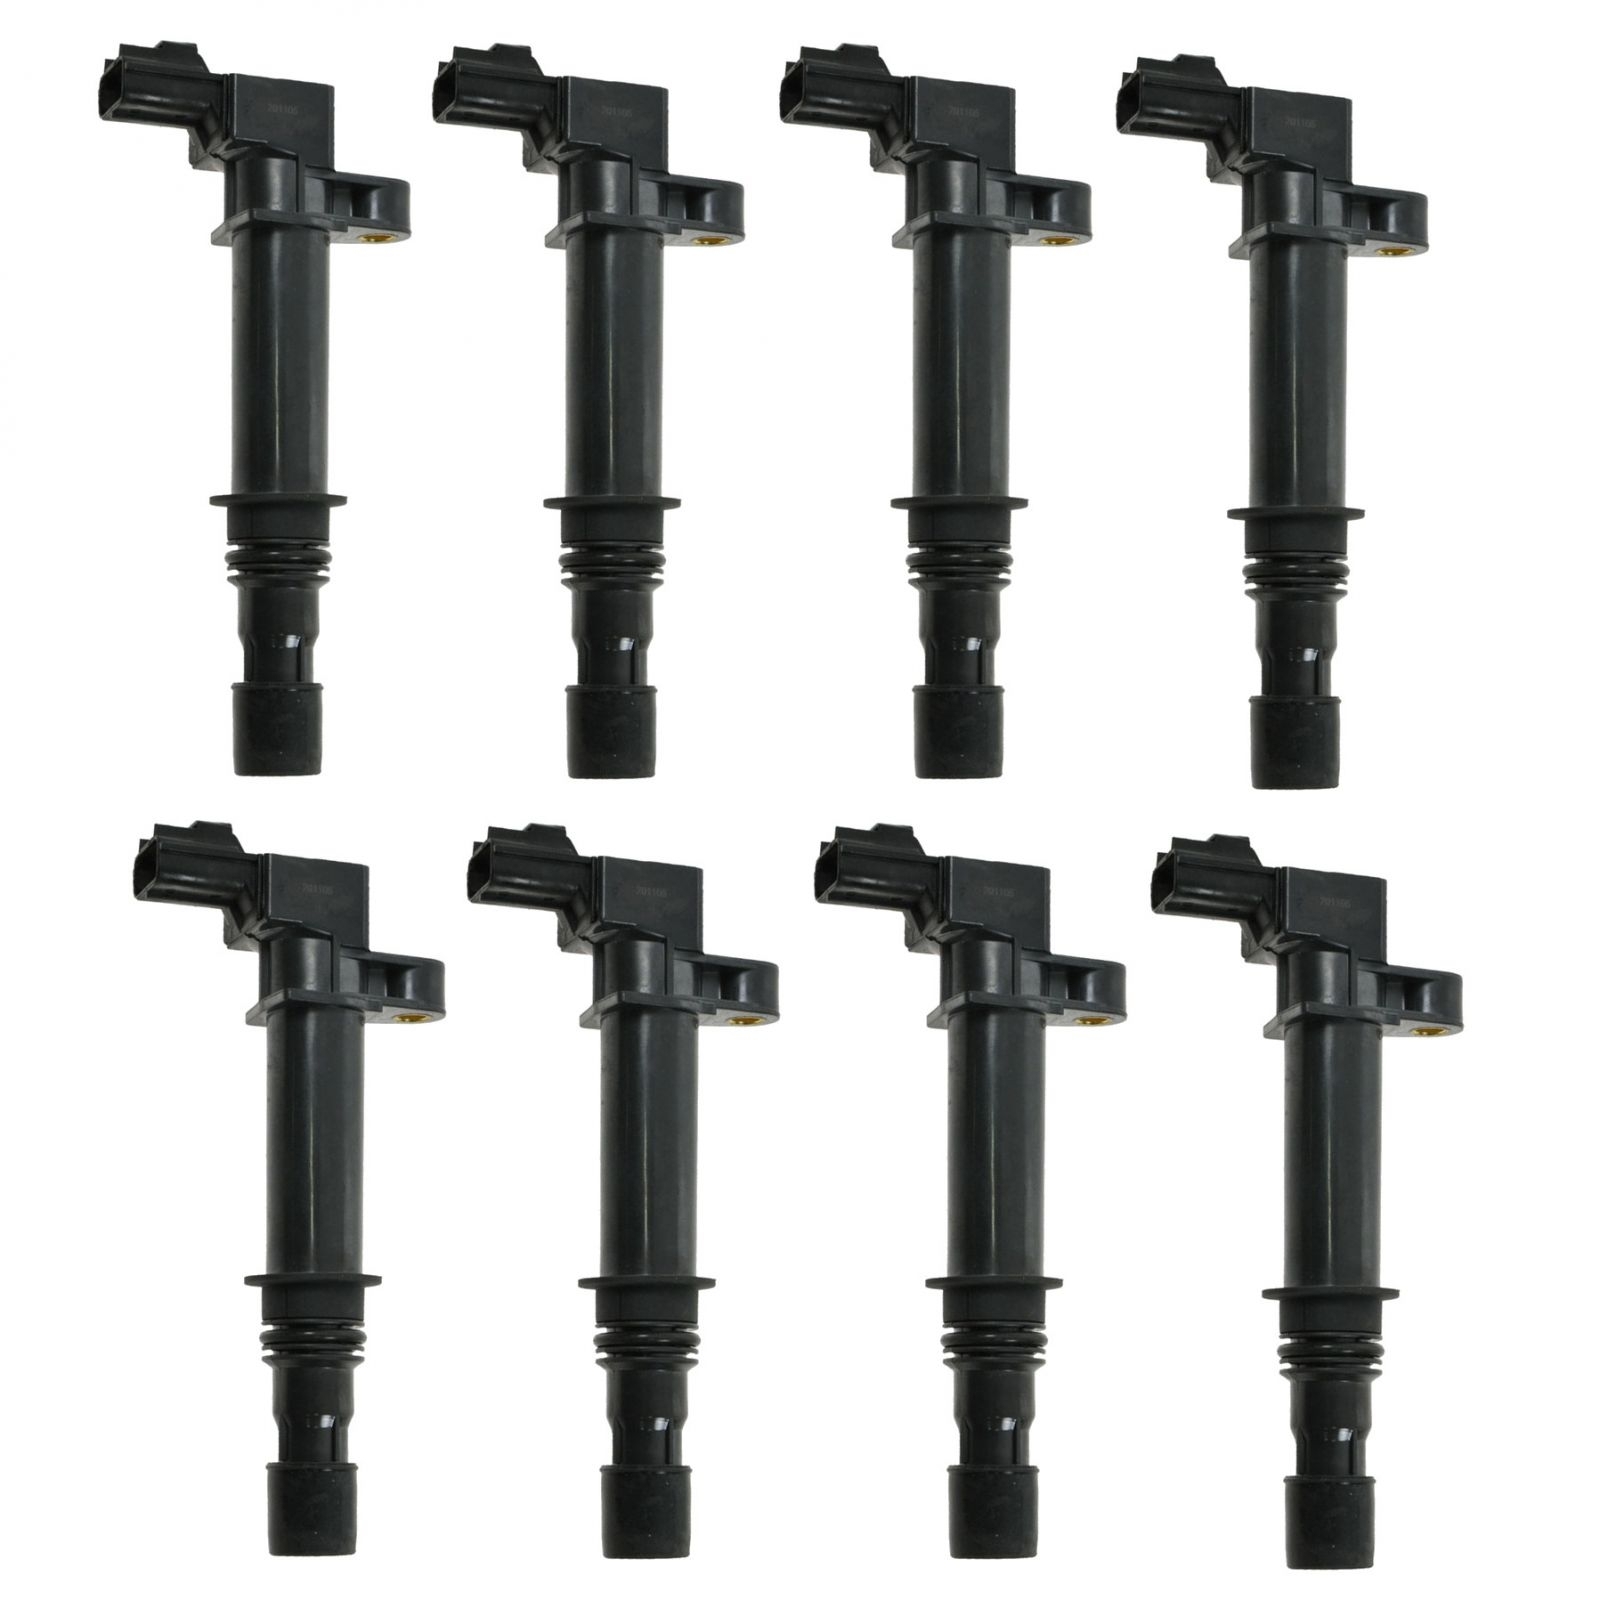 Trq 8 Piece Ignition Coil Set For 99-08 Grand Cherokee 06-07 Commander, HWNV-ICA61507